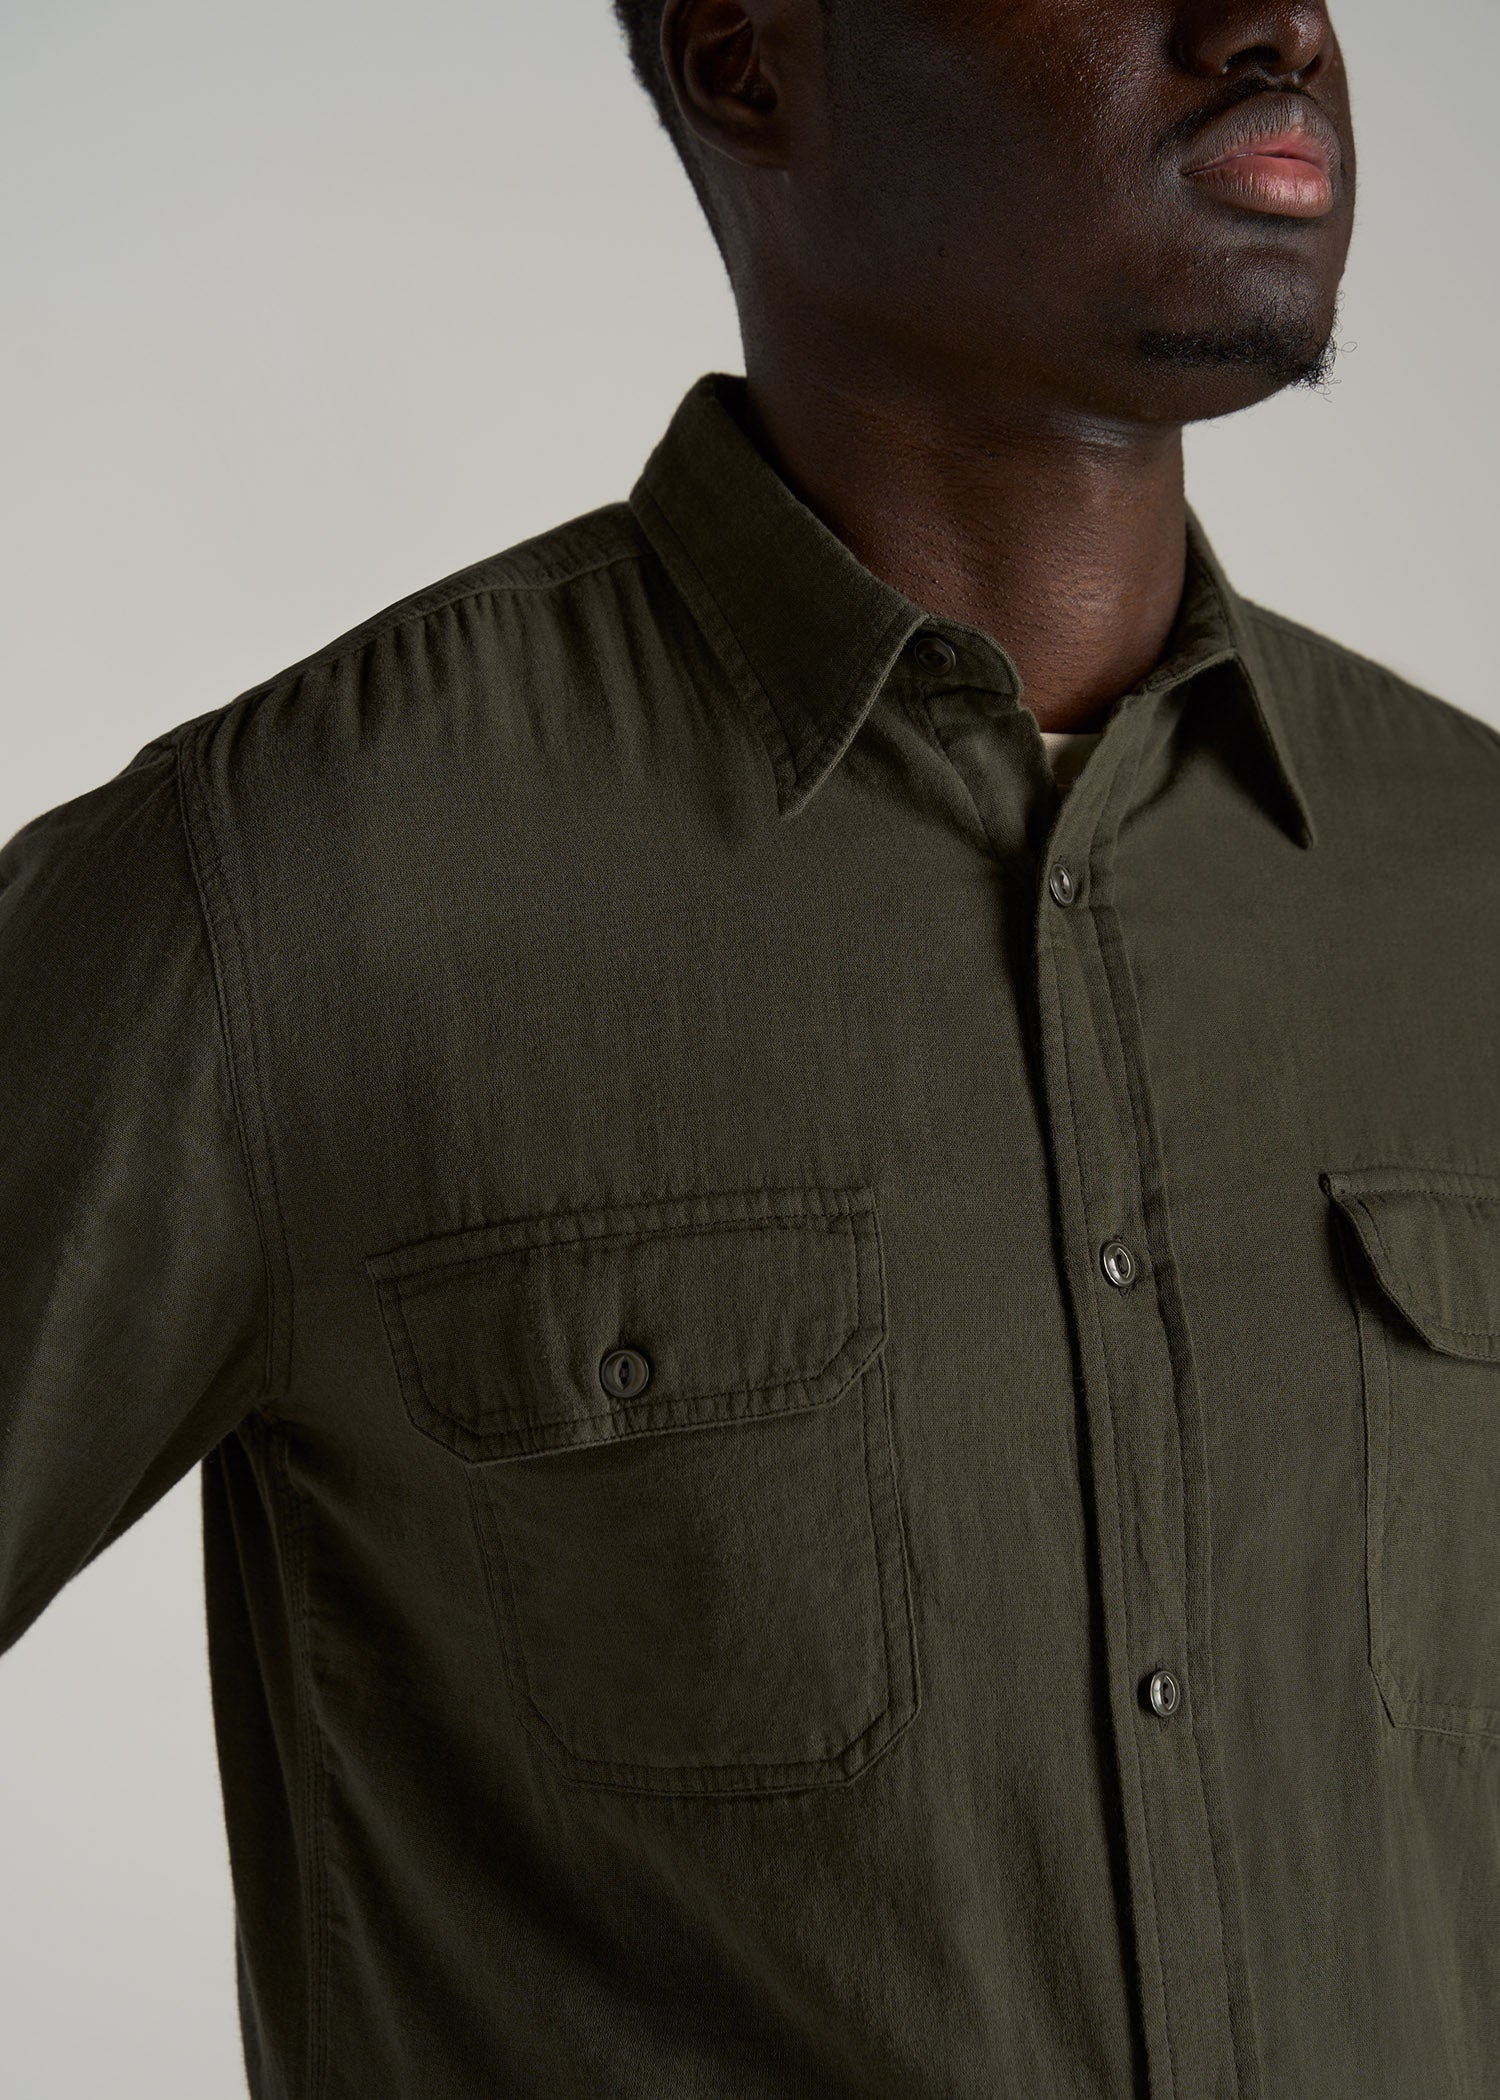     American-Tall-Men-Double-Weave-Shirt-Vintage-Thyme-Green-detail